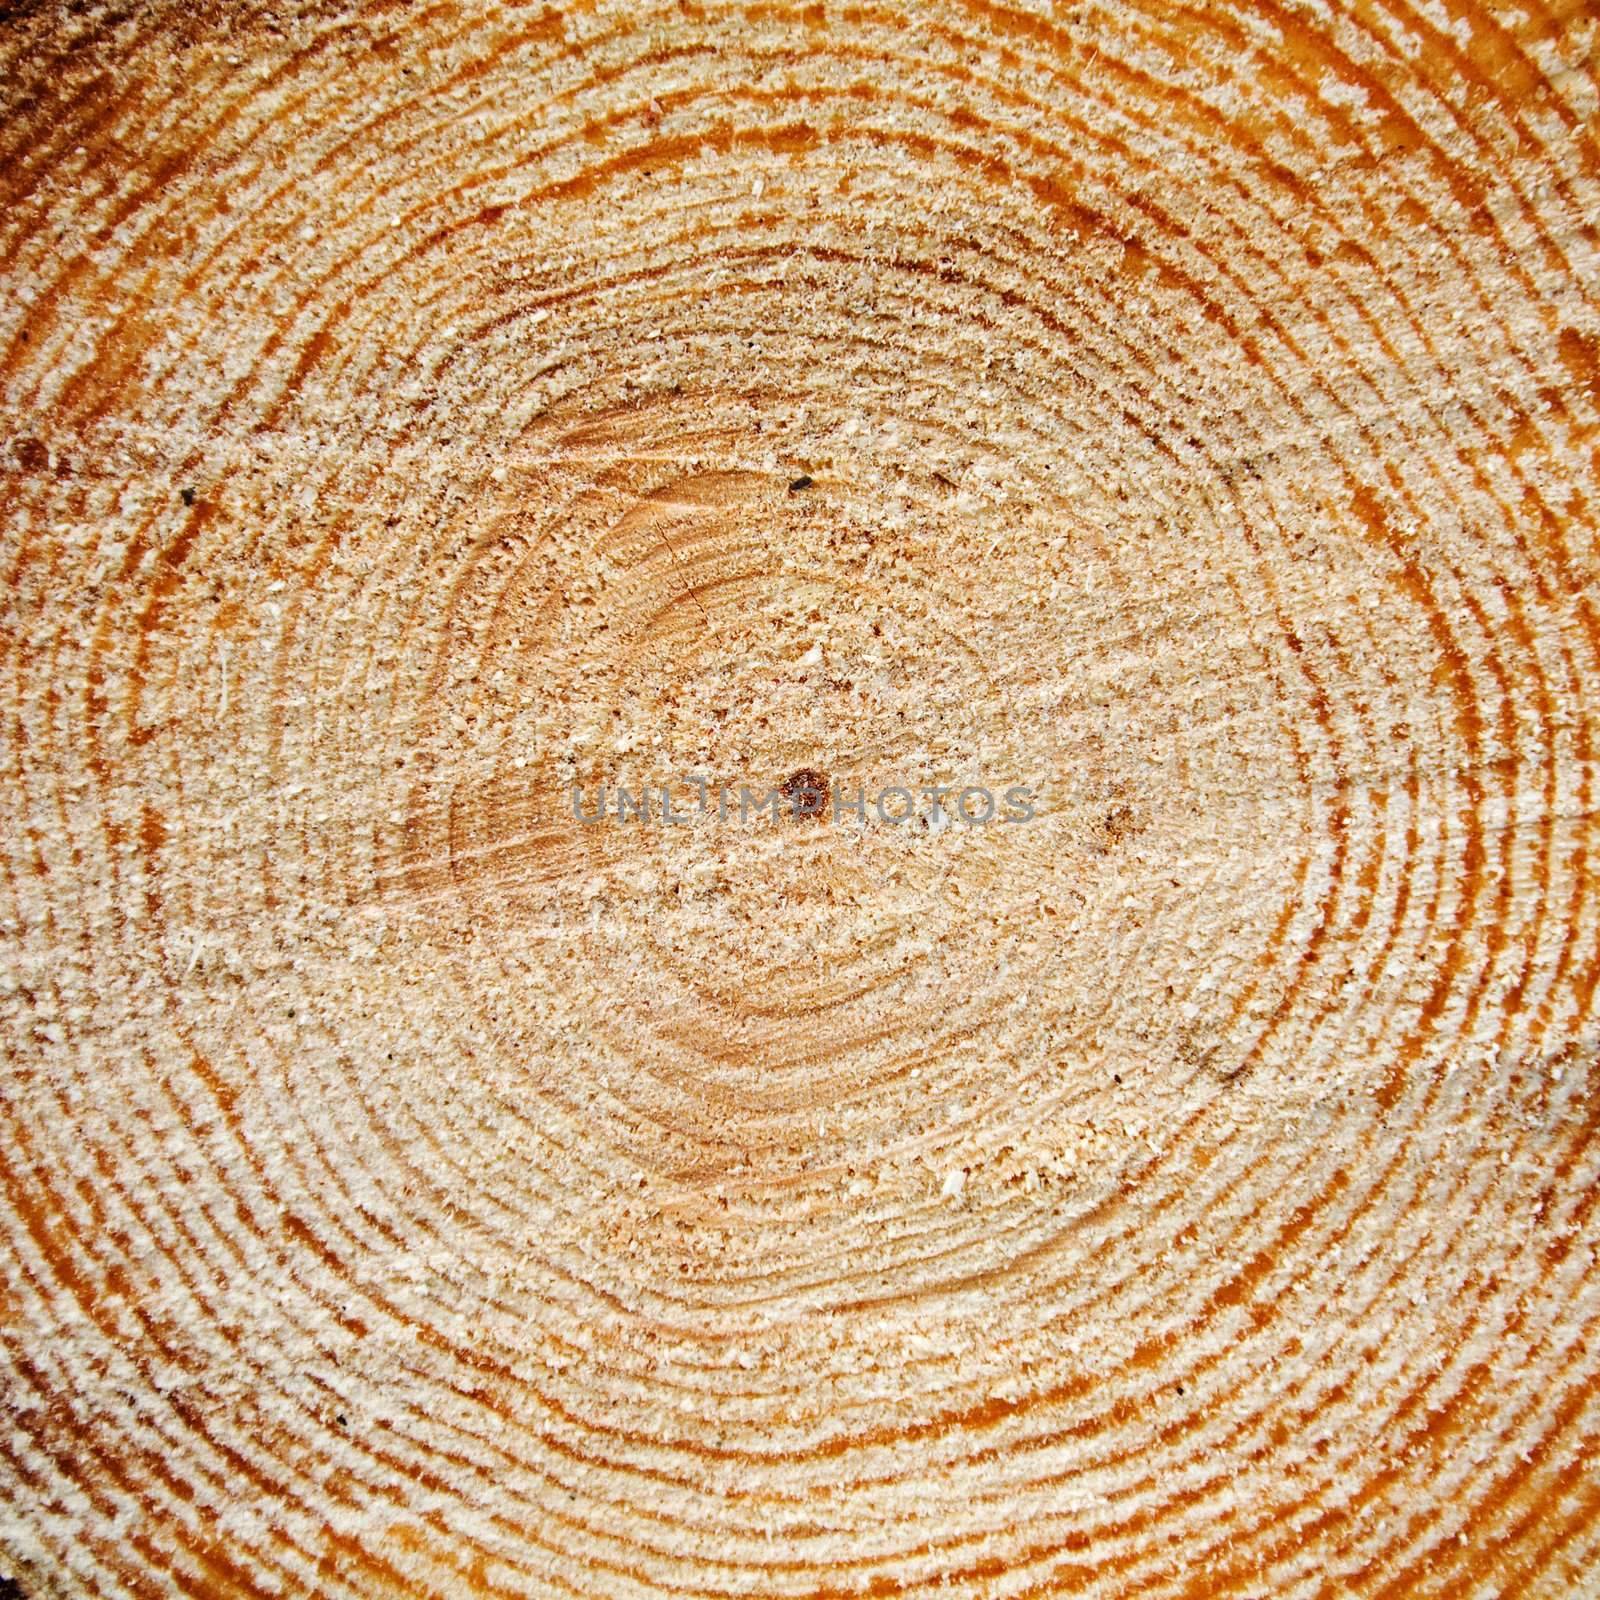 End face of a log made of a pine